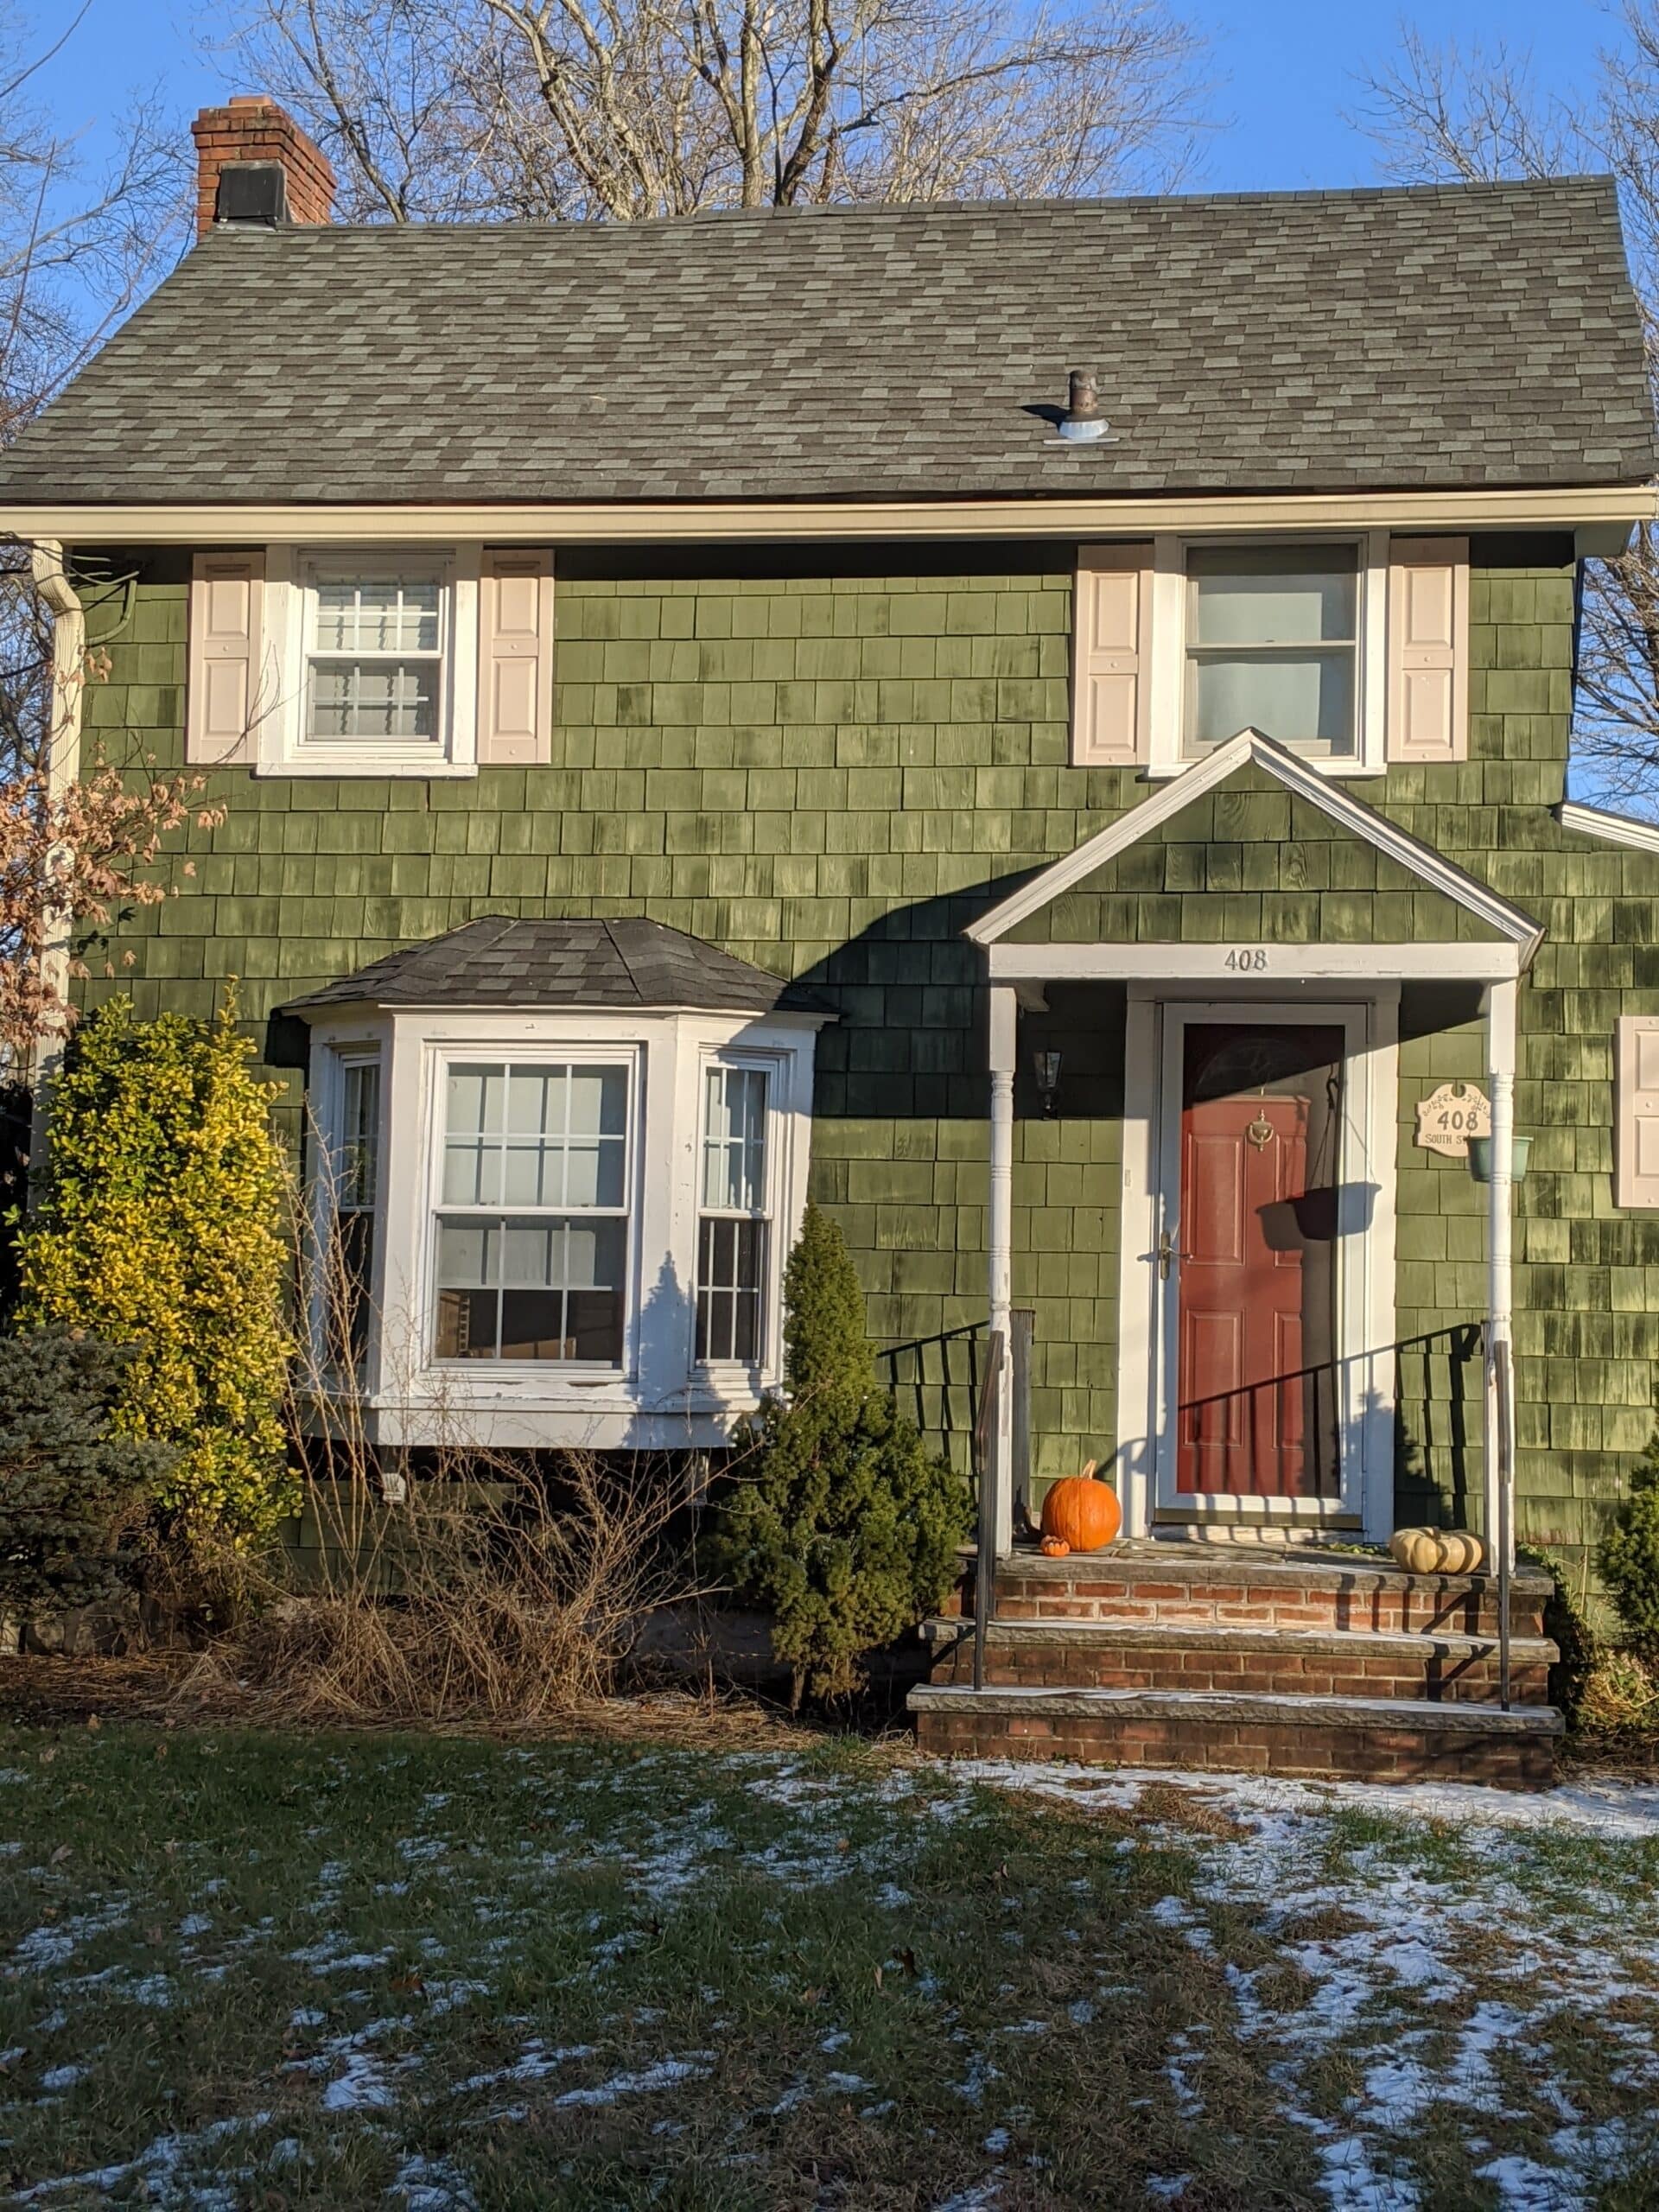 A older green home with a pumpkin on its stoop